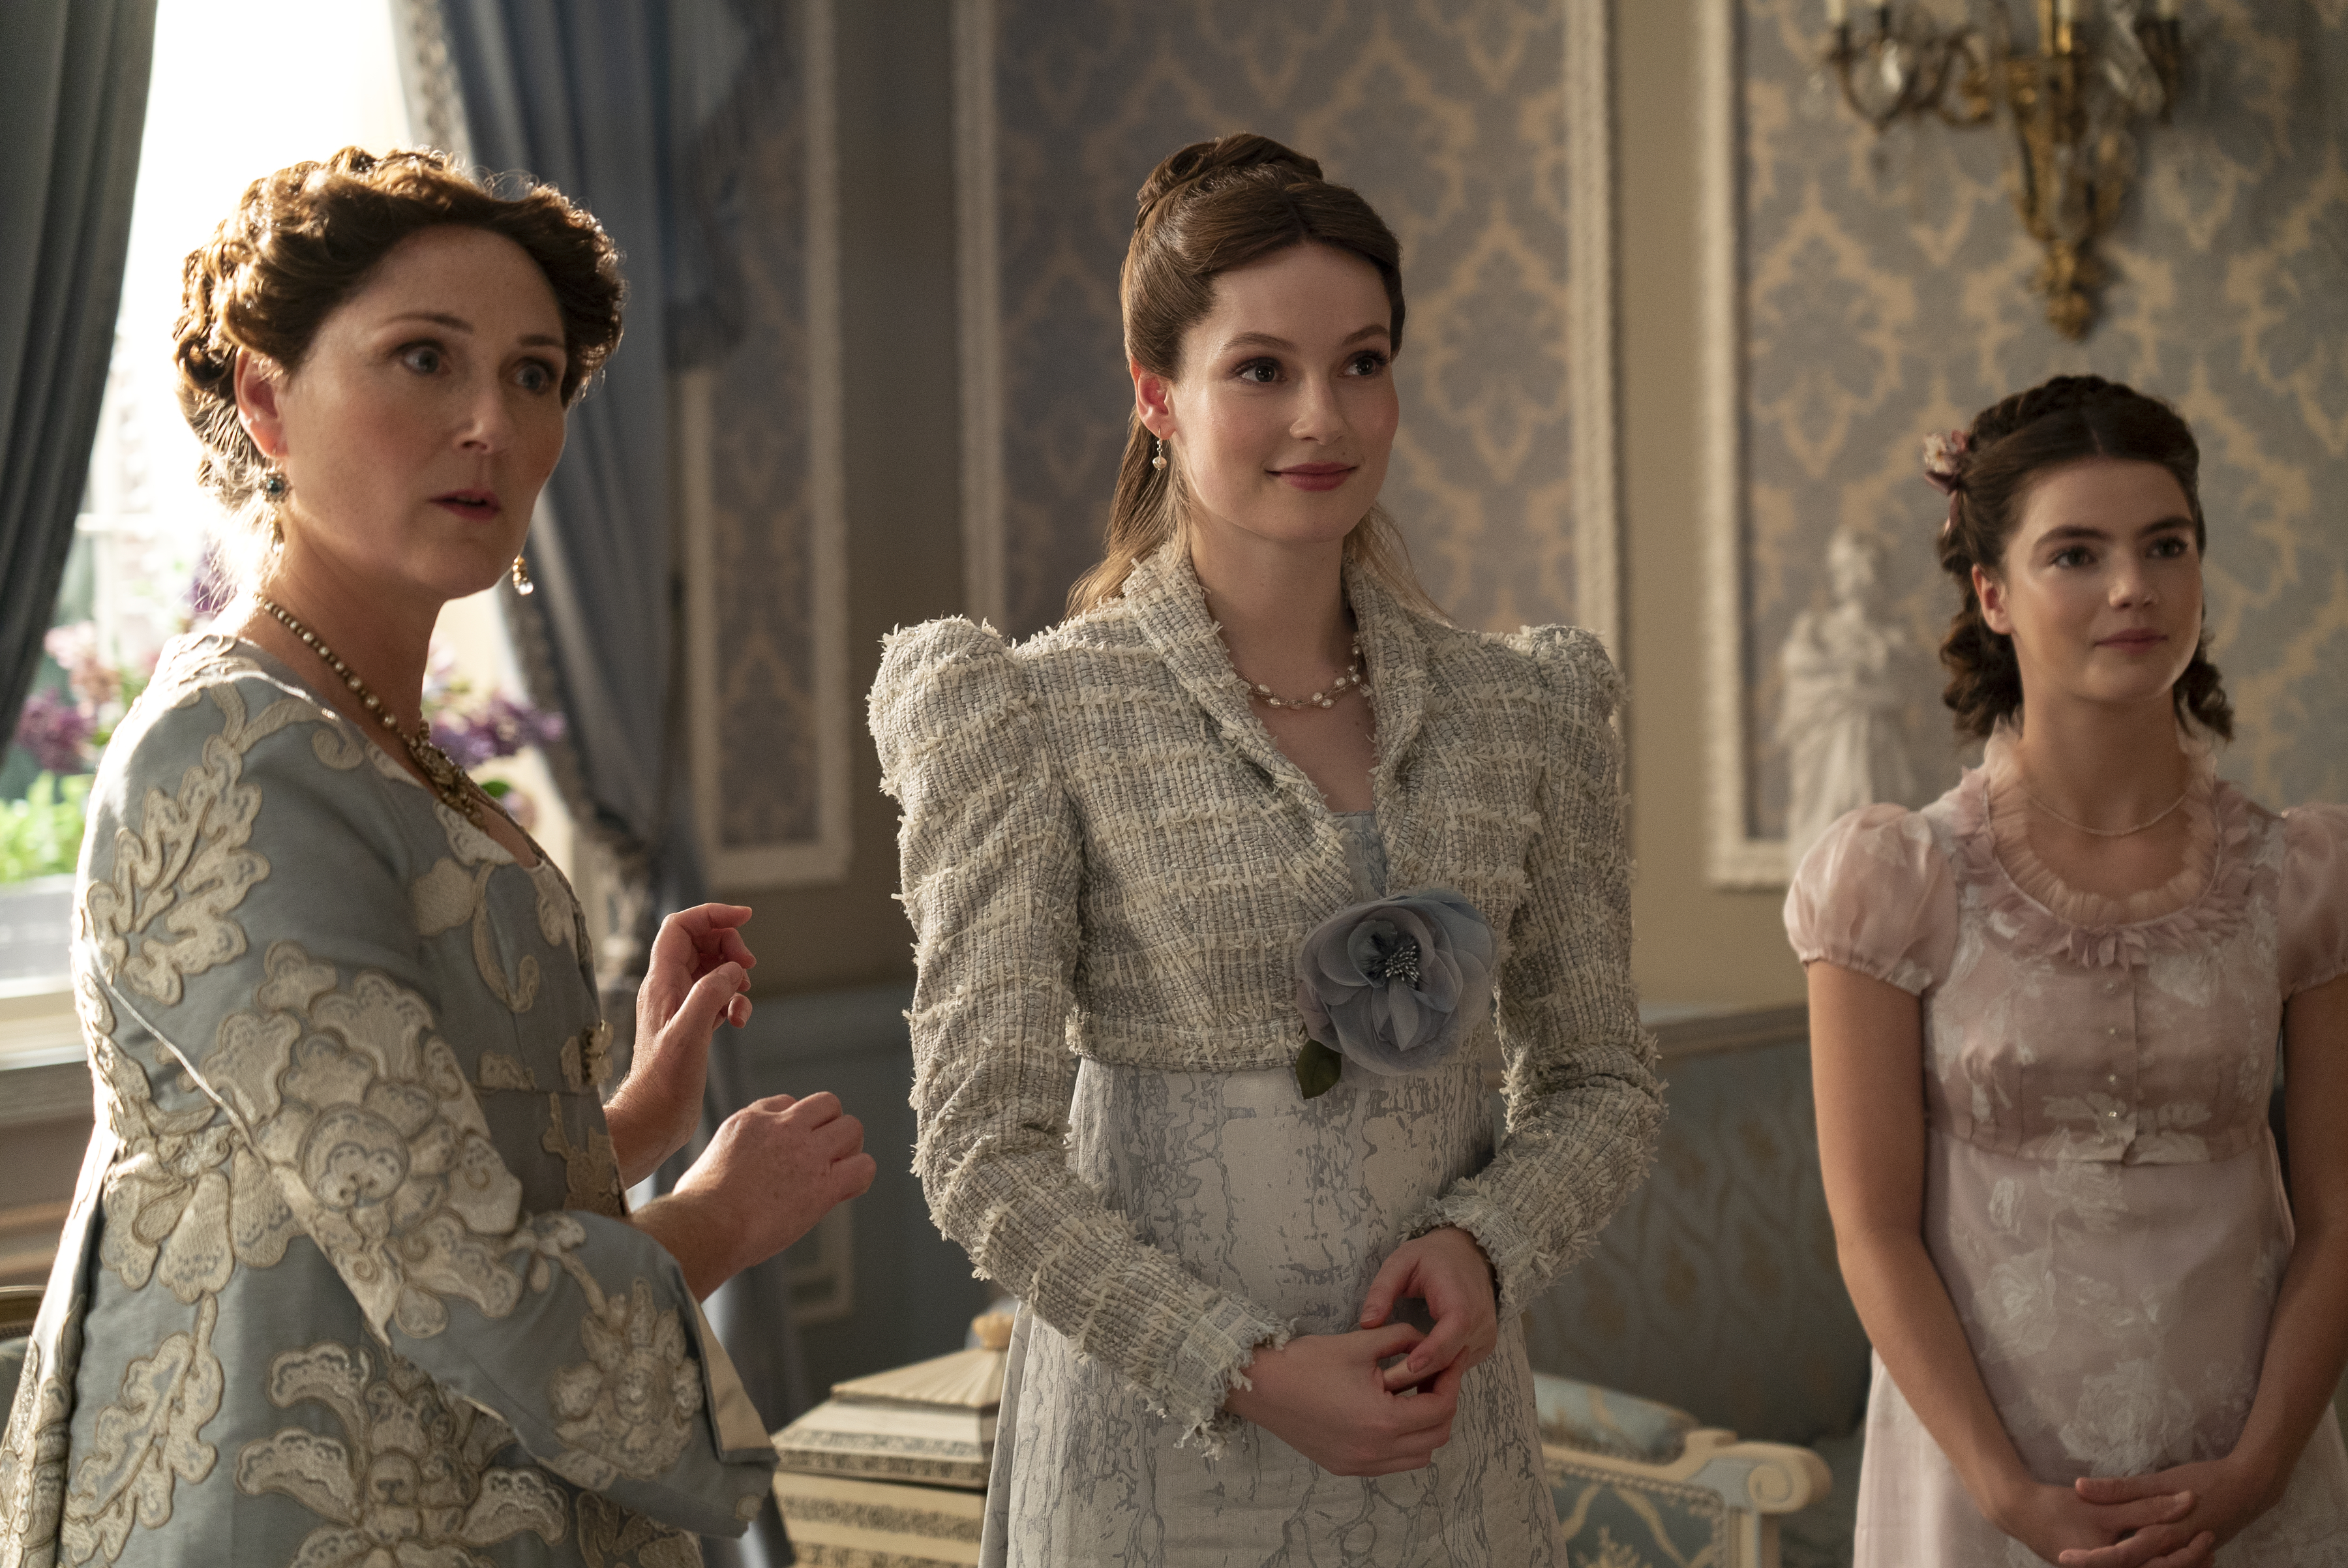 Three actresses in period costumes on a set that resembles an elegant, vintage room, likely from a historical drama